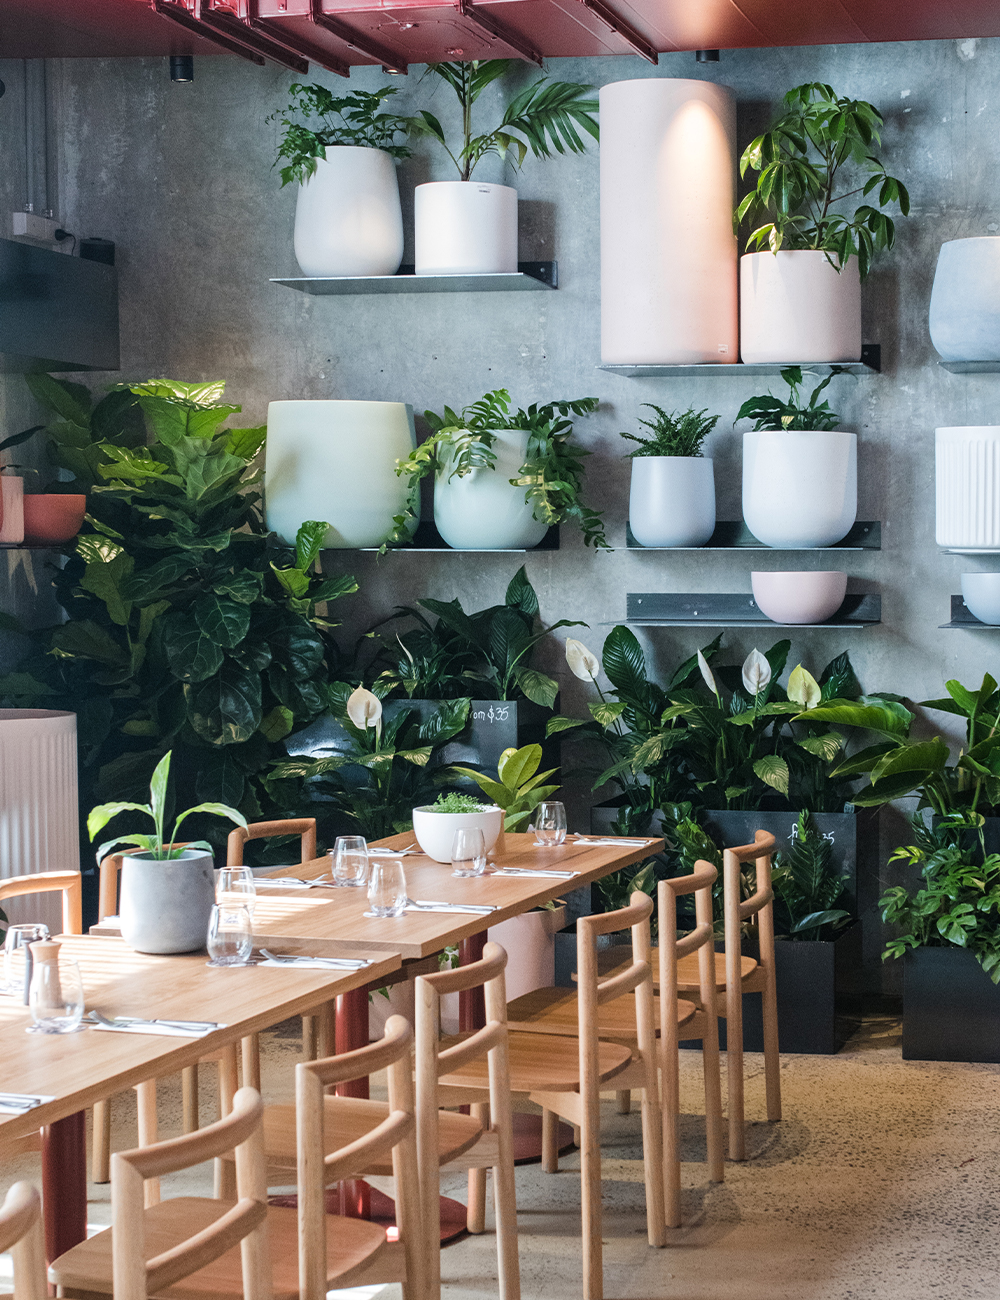 interior of a cafe covered in plants